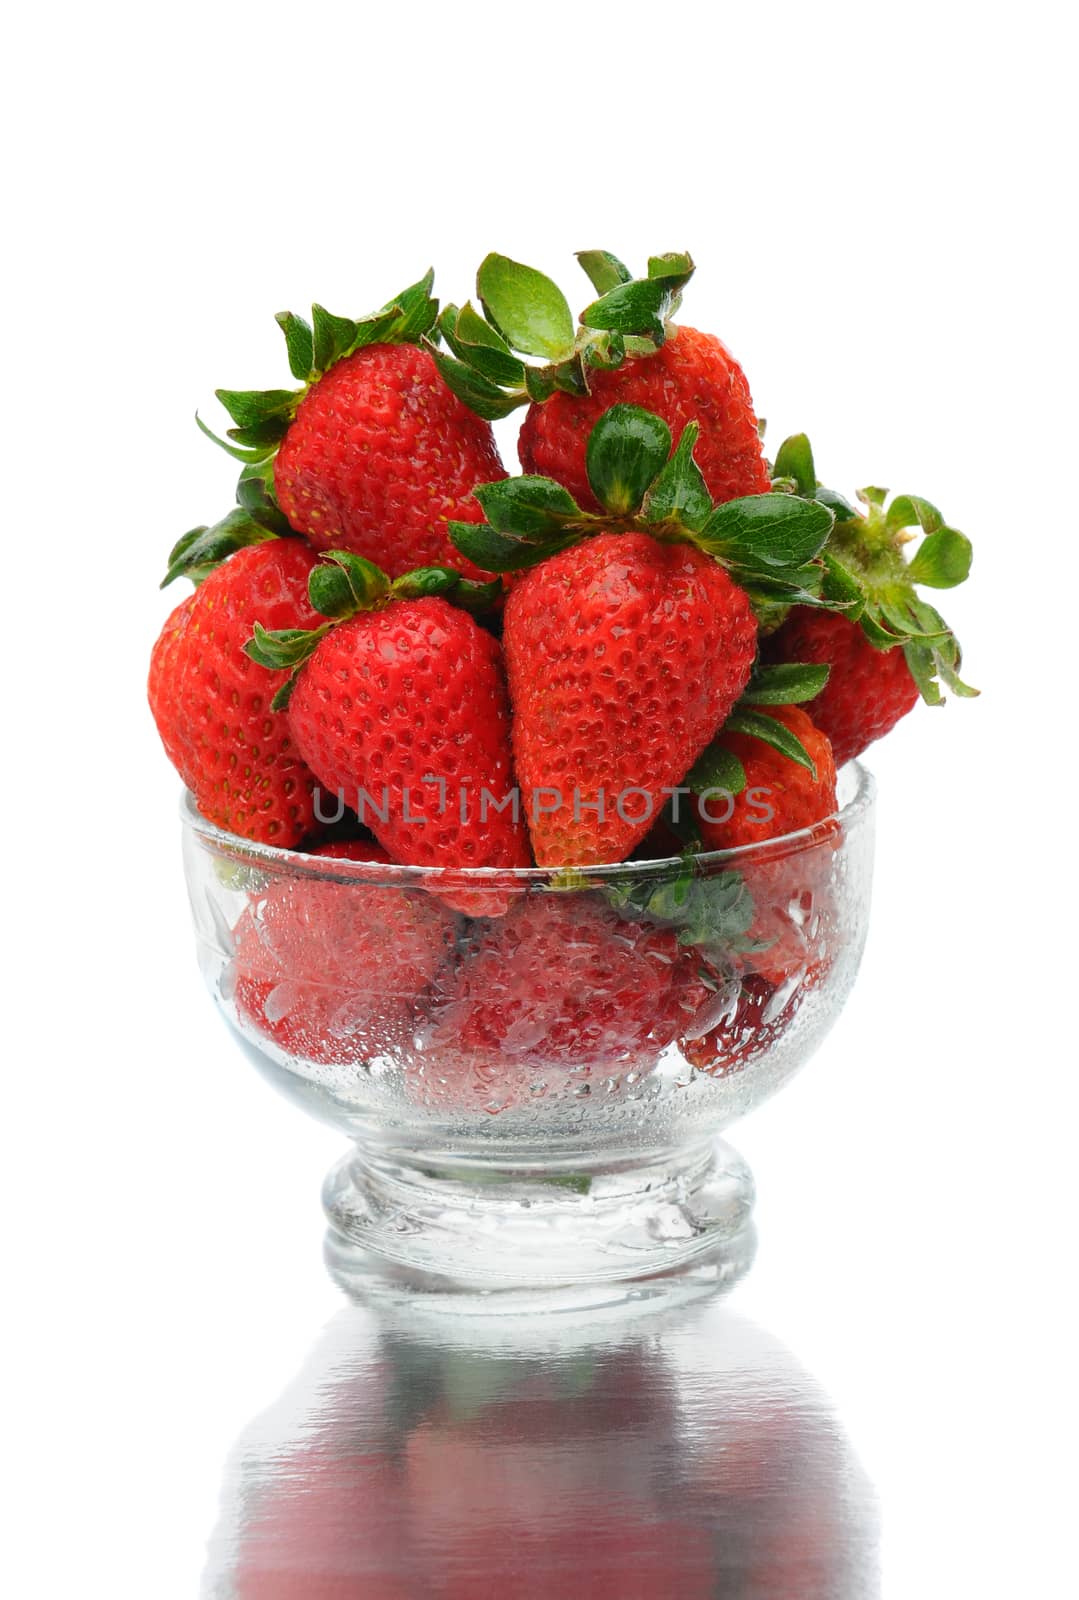 Closeup of fresh picked strawberries in a glass bowl with reflection over a white background.